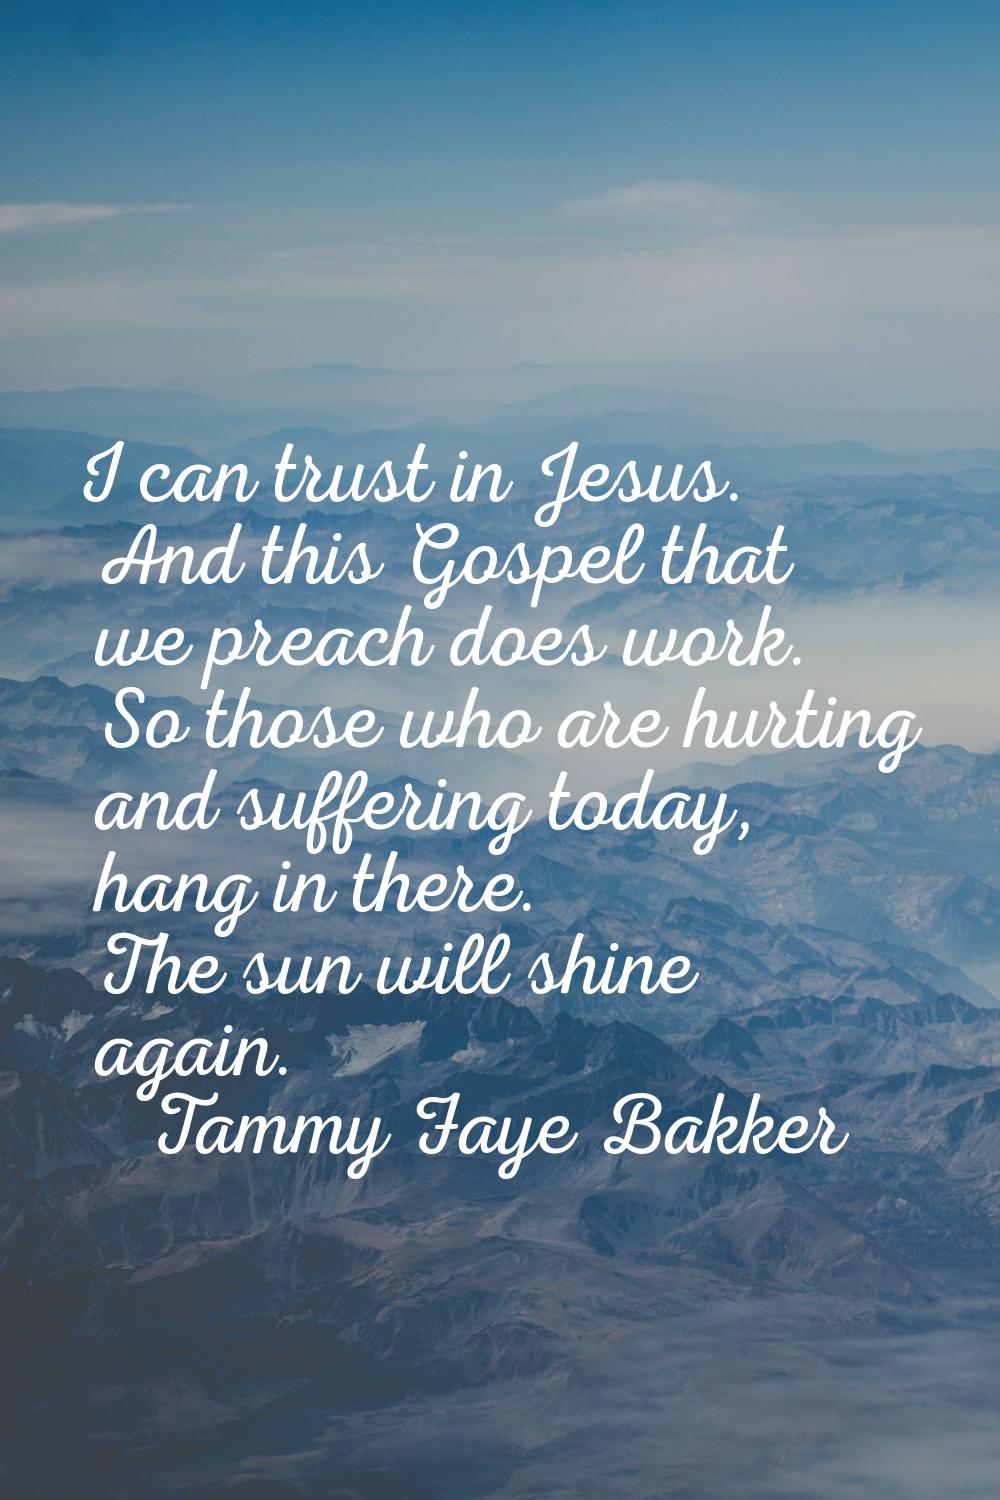 I can trust in Jesus. And this Gospel that we preach does work. So those who are hurting and suffer